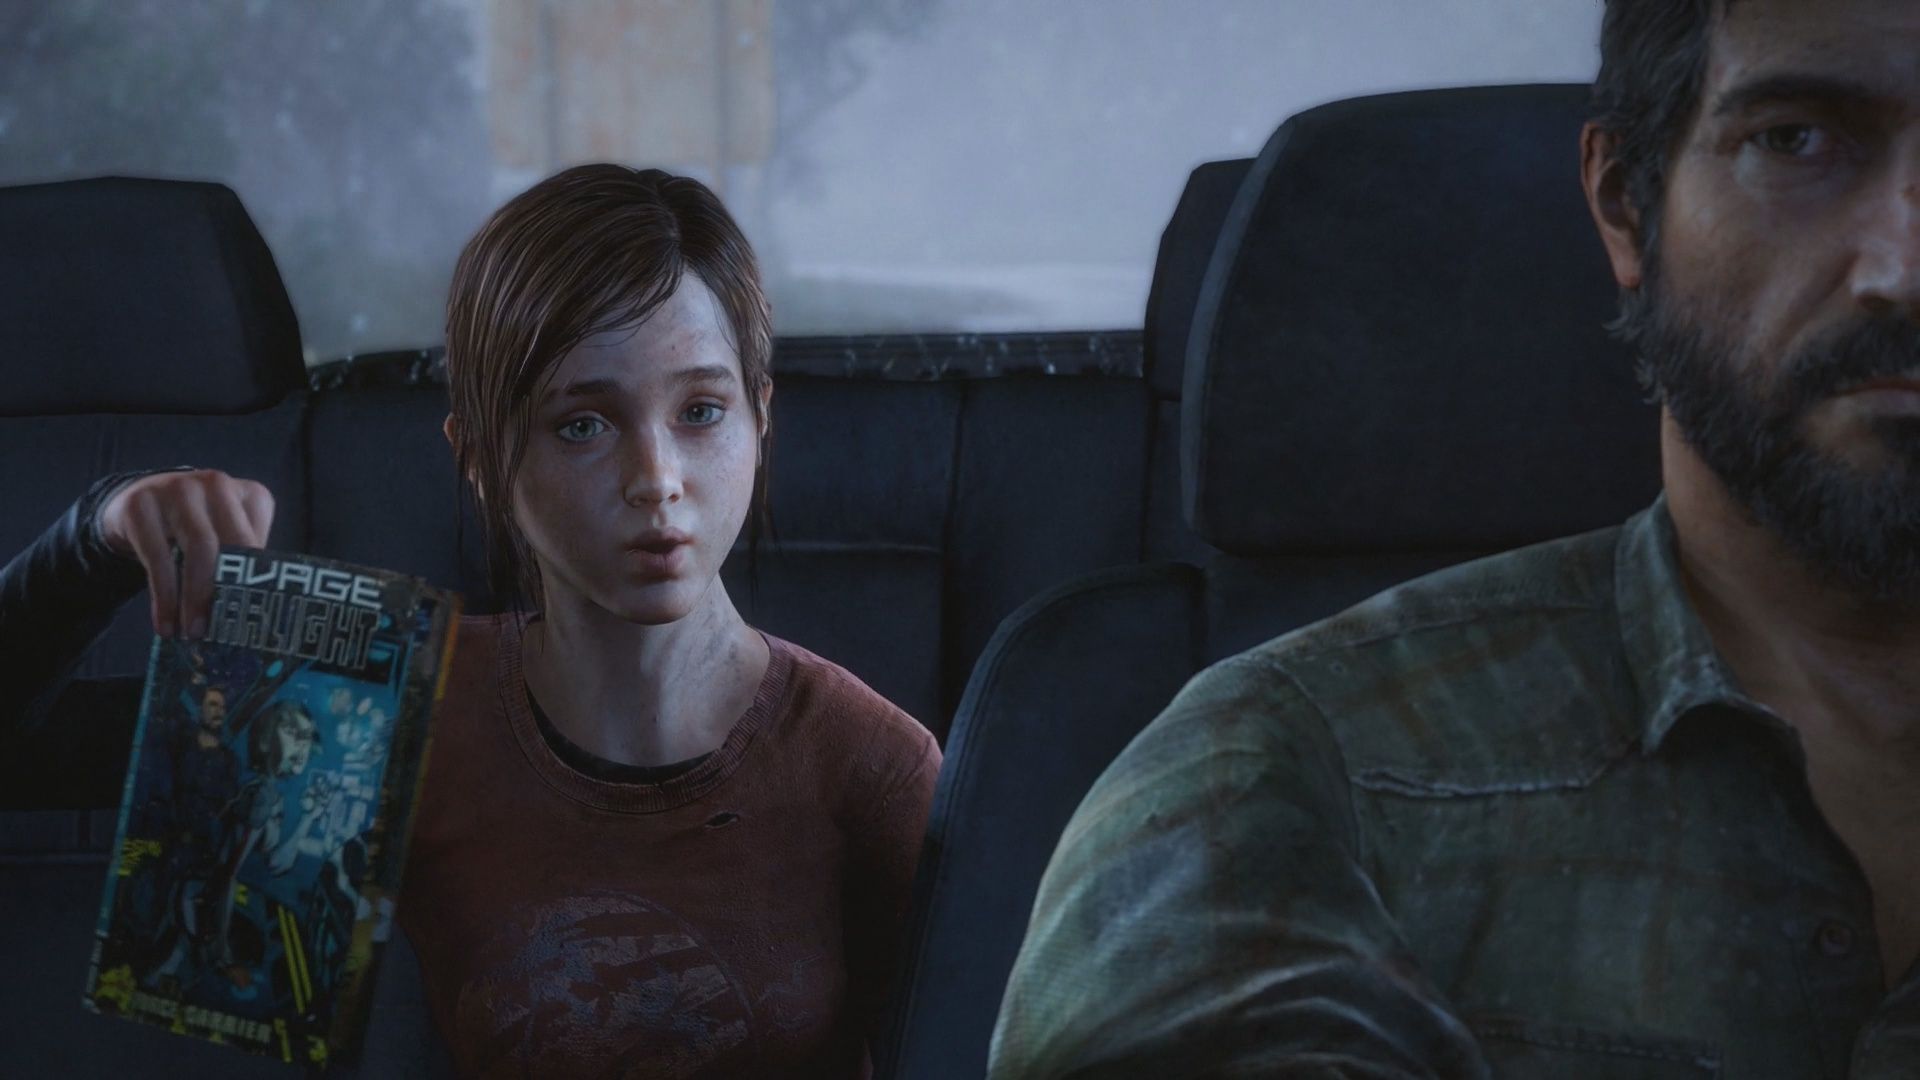 Ellie shows Joel a comic book inside a car in The Last of Us Part 1